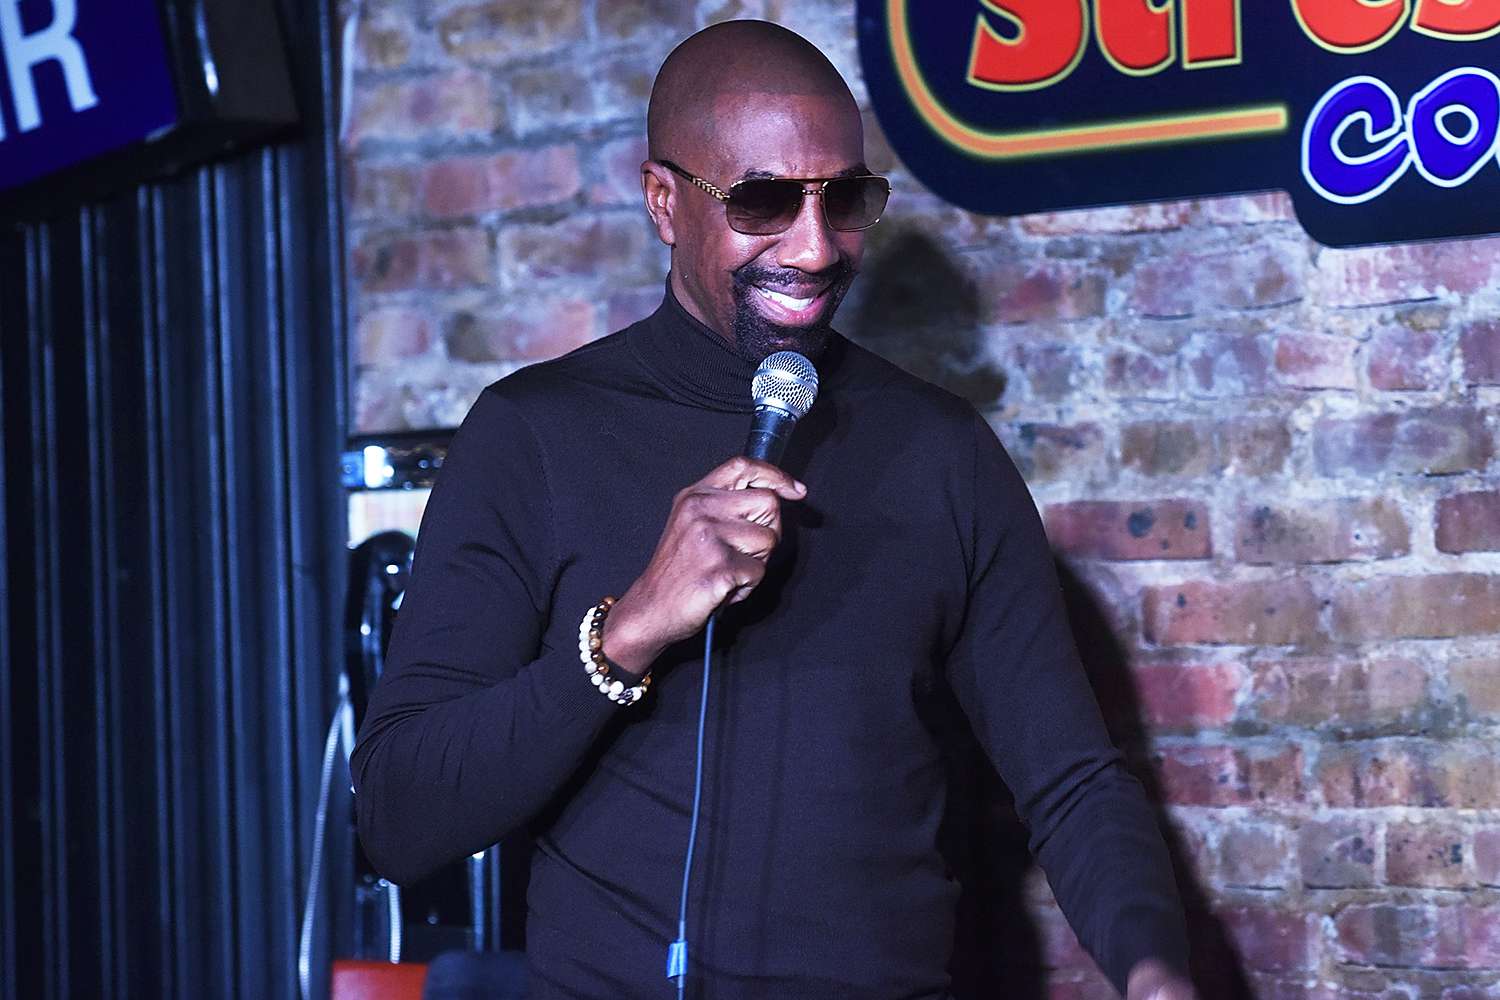 JB Smoove performs at The Stress Factory Comedy Club on January 14, 2022 in New Brunswick, New Jersey.